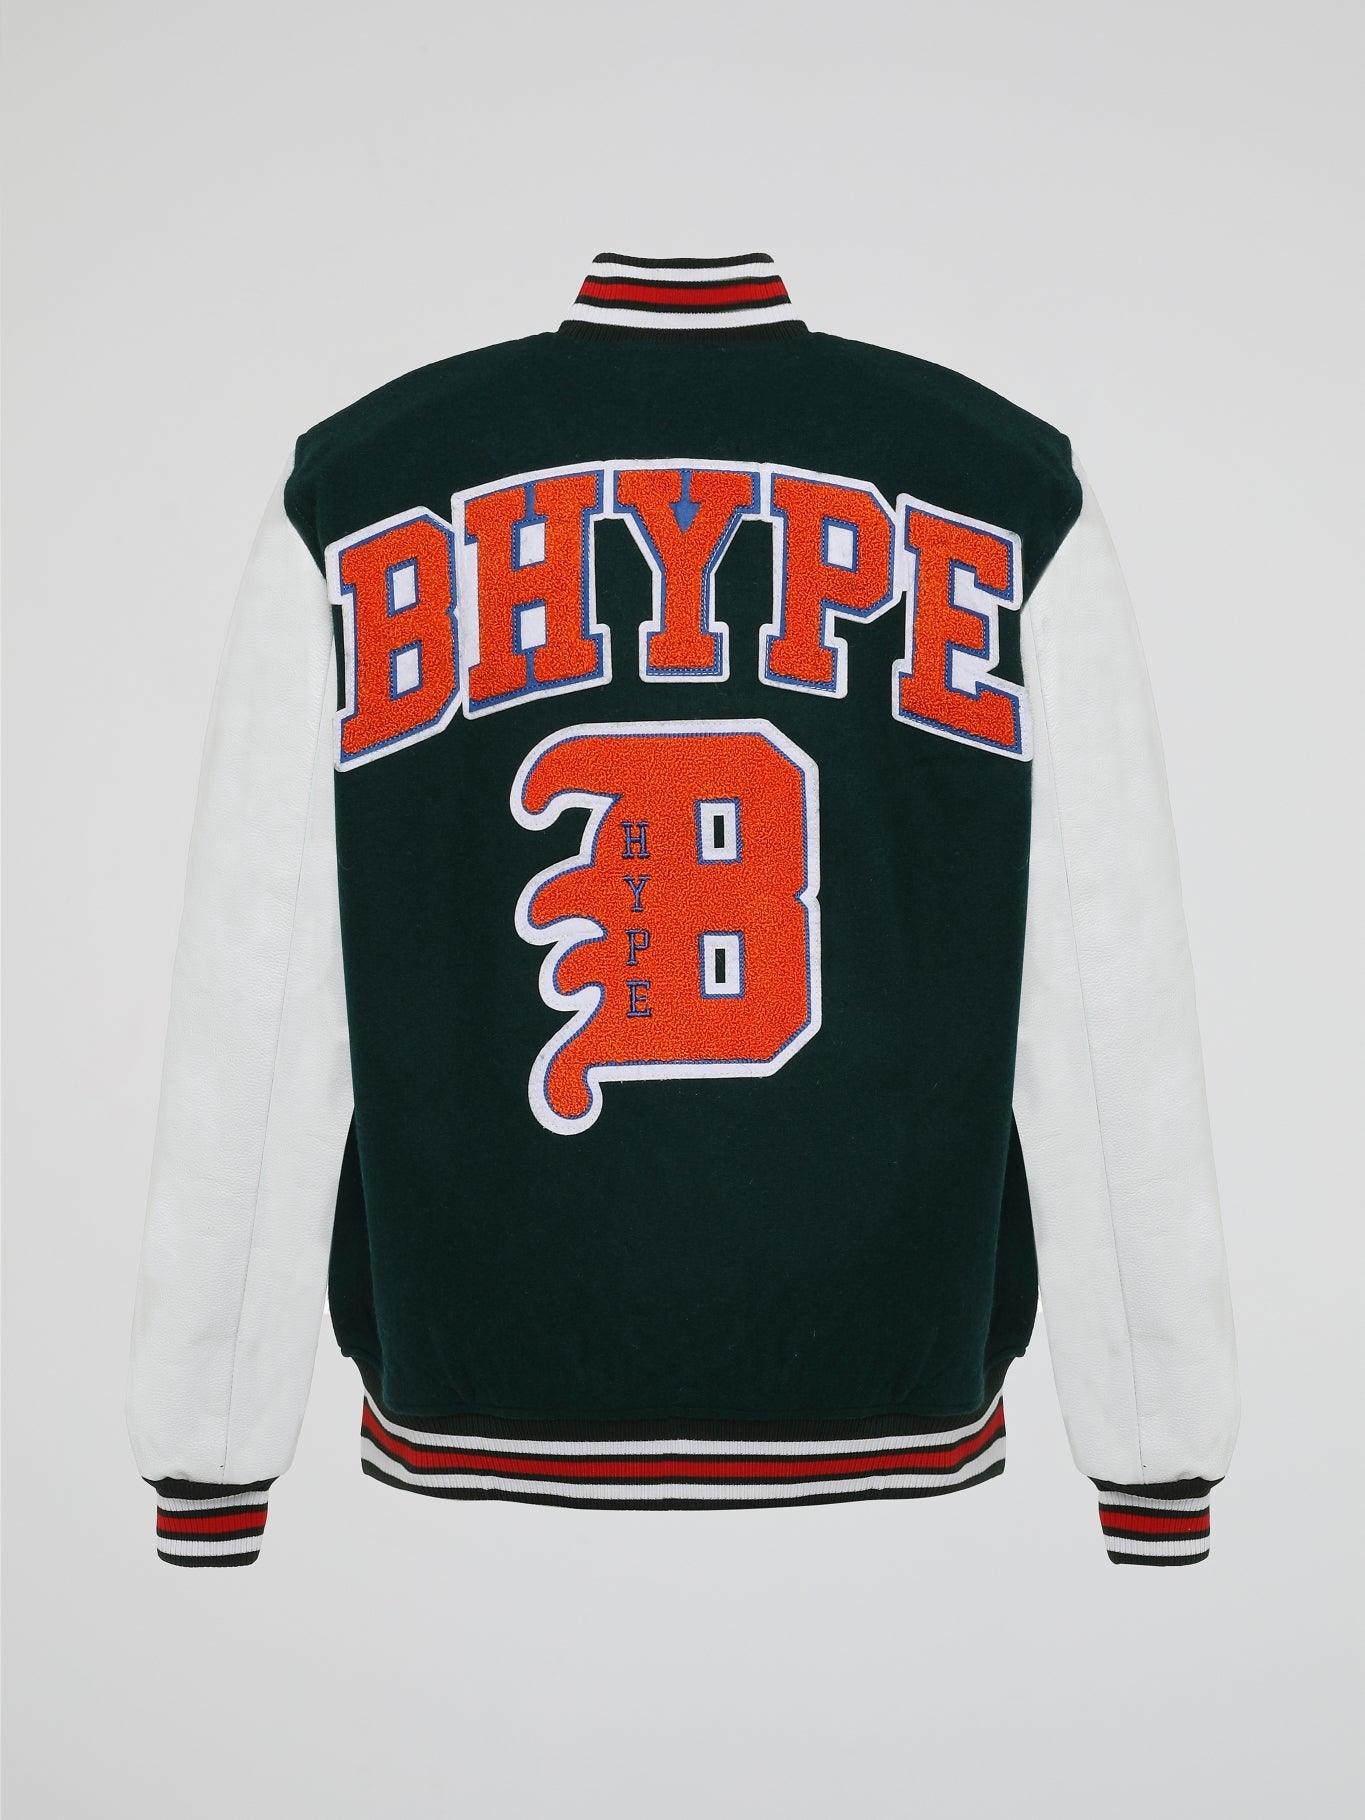 BHYPE VARSITY COLLECTION JACKET GREEN/WHITE - B-Hype Society